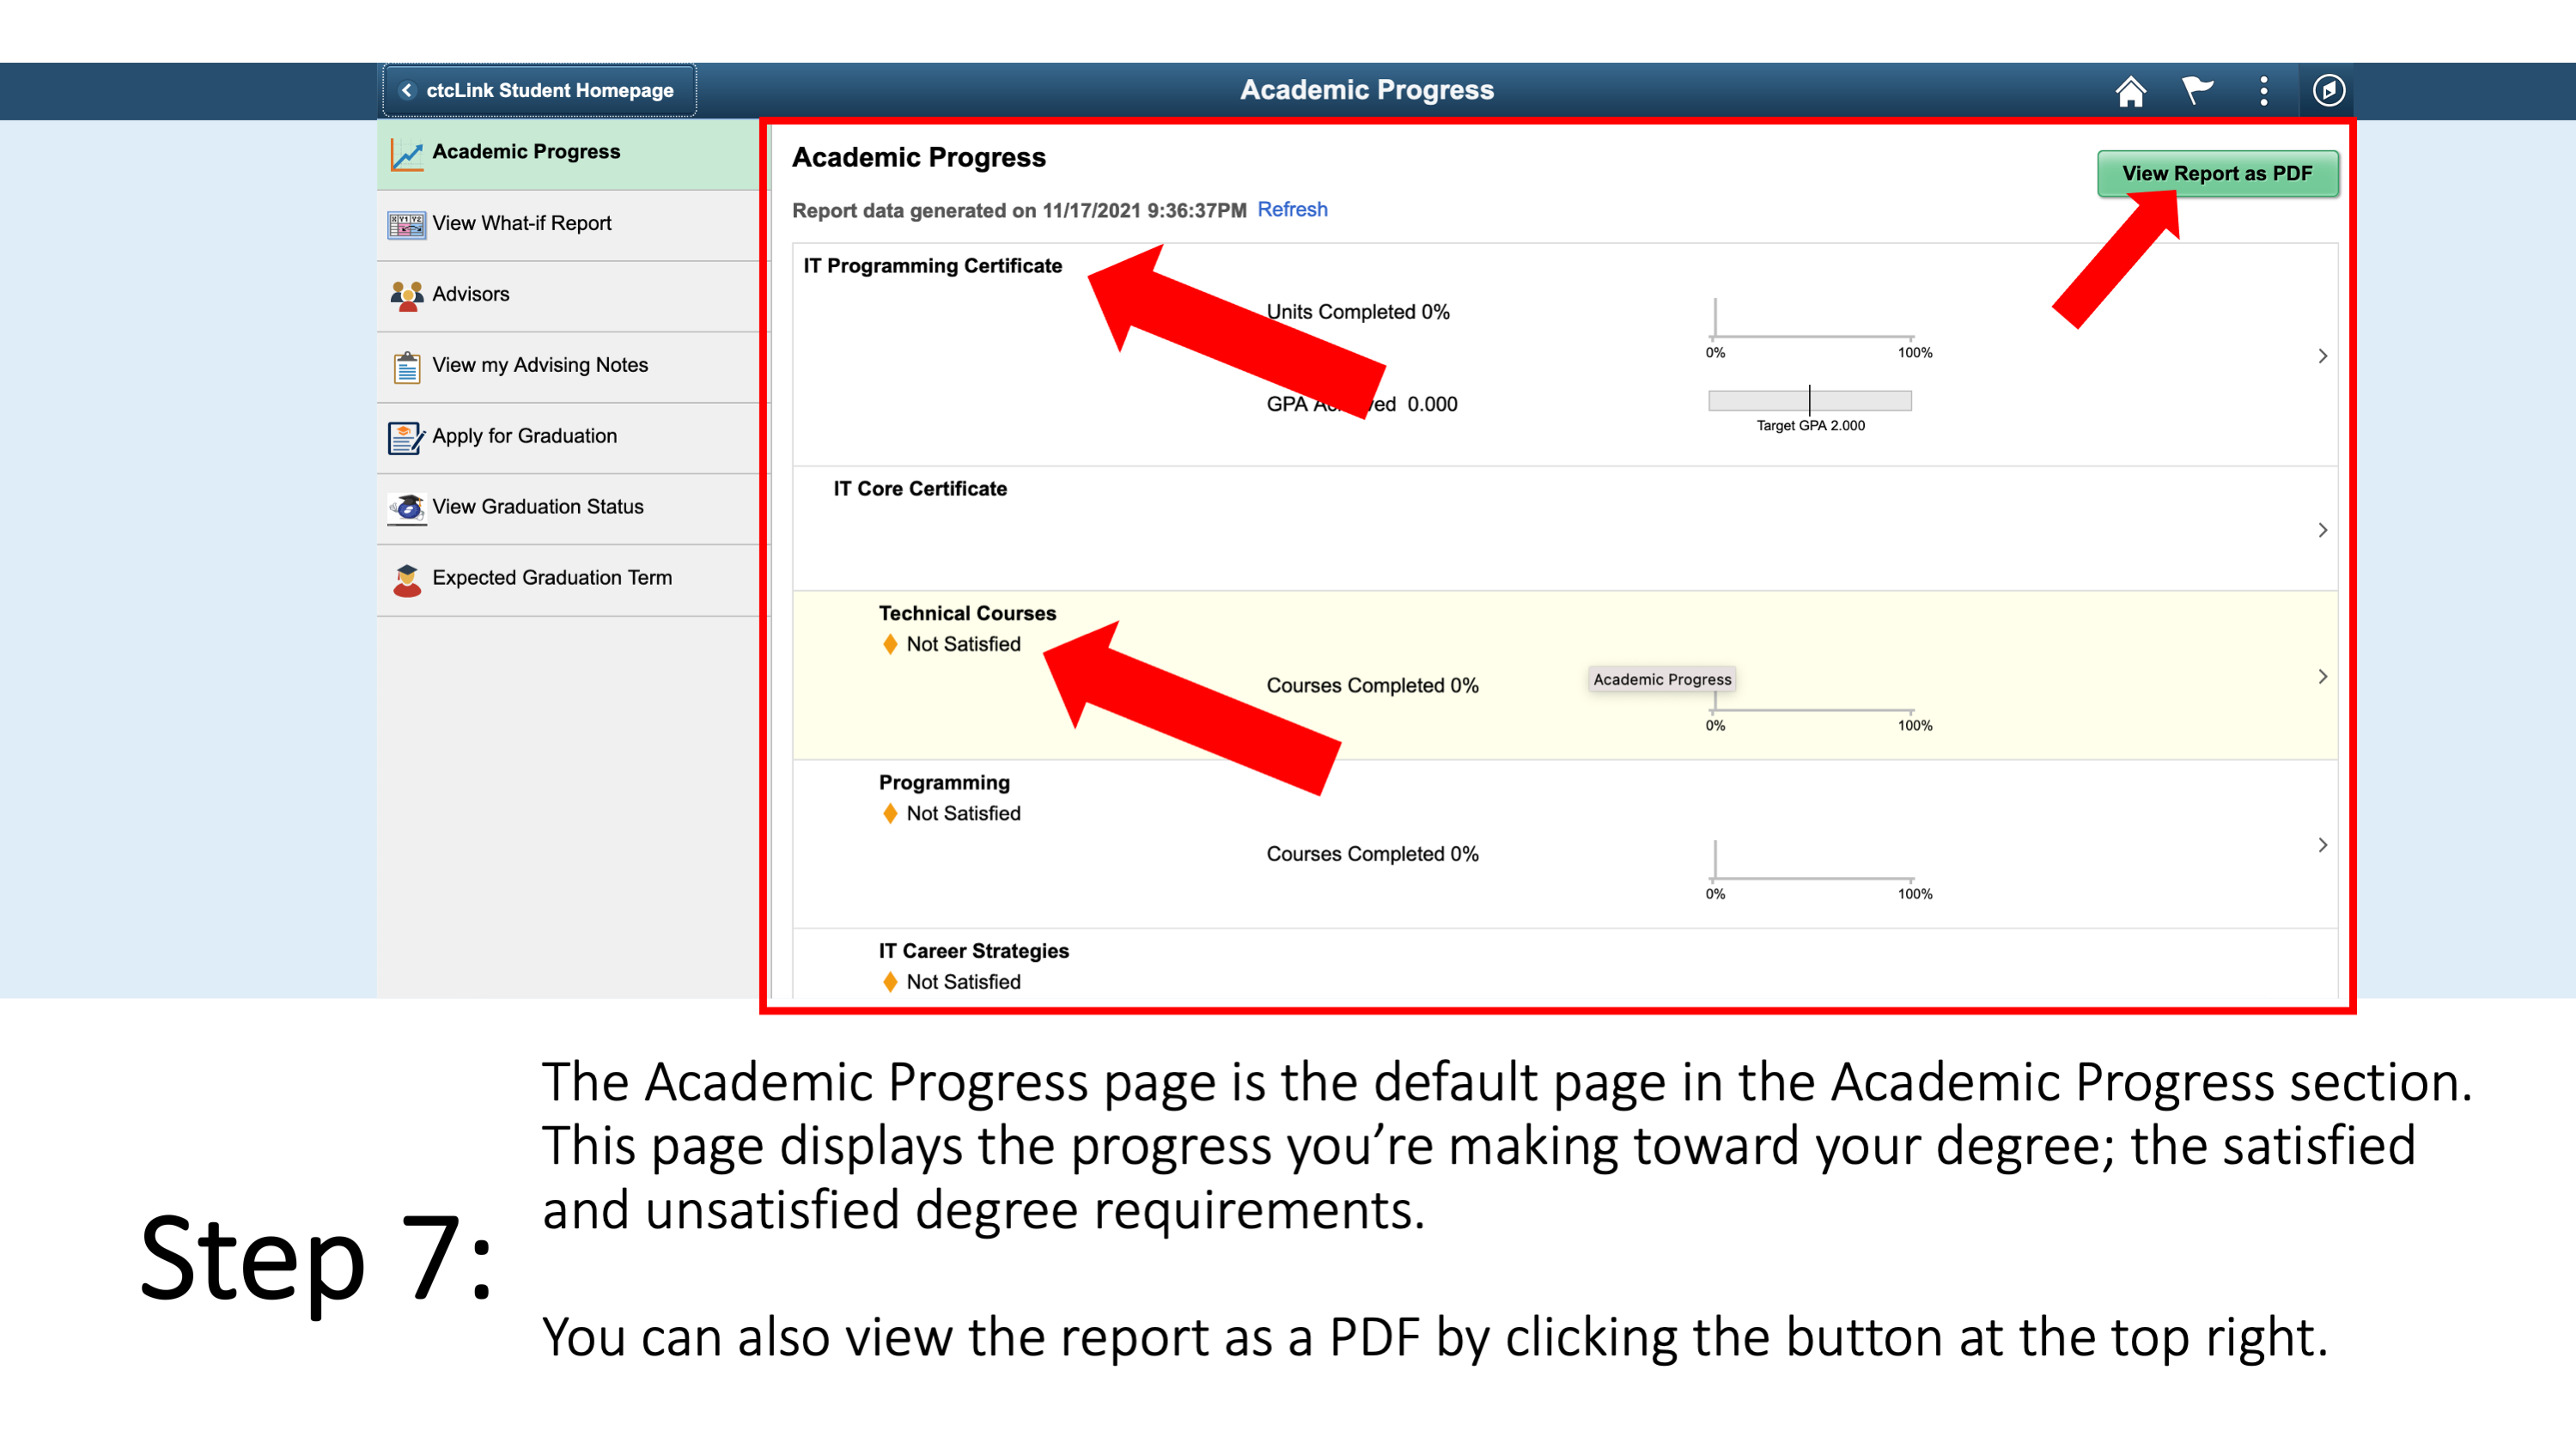 Step 7: The Academic Progress page is the default page in the Academic Progress section. This page displays the progress you’re making toward your degree; the satisfied and unsatisfied degree requirements. You can also view the report as a PDF by clicking the button at the top right. 